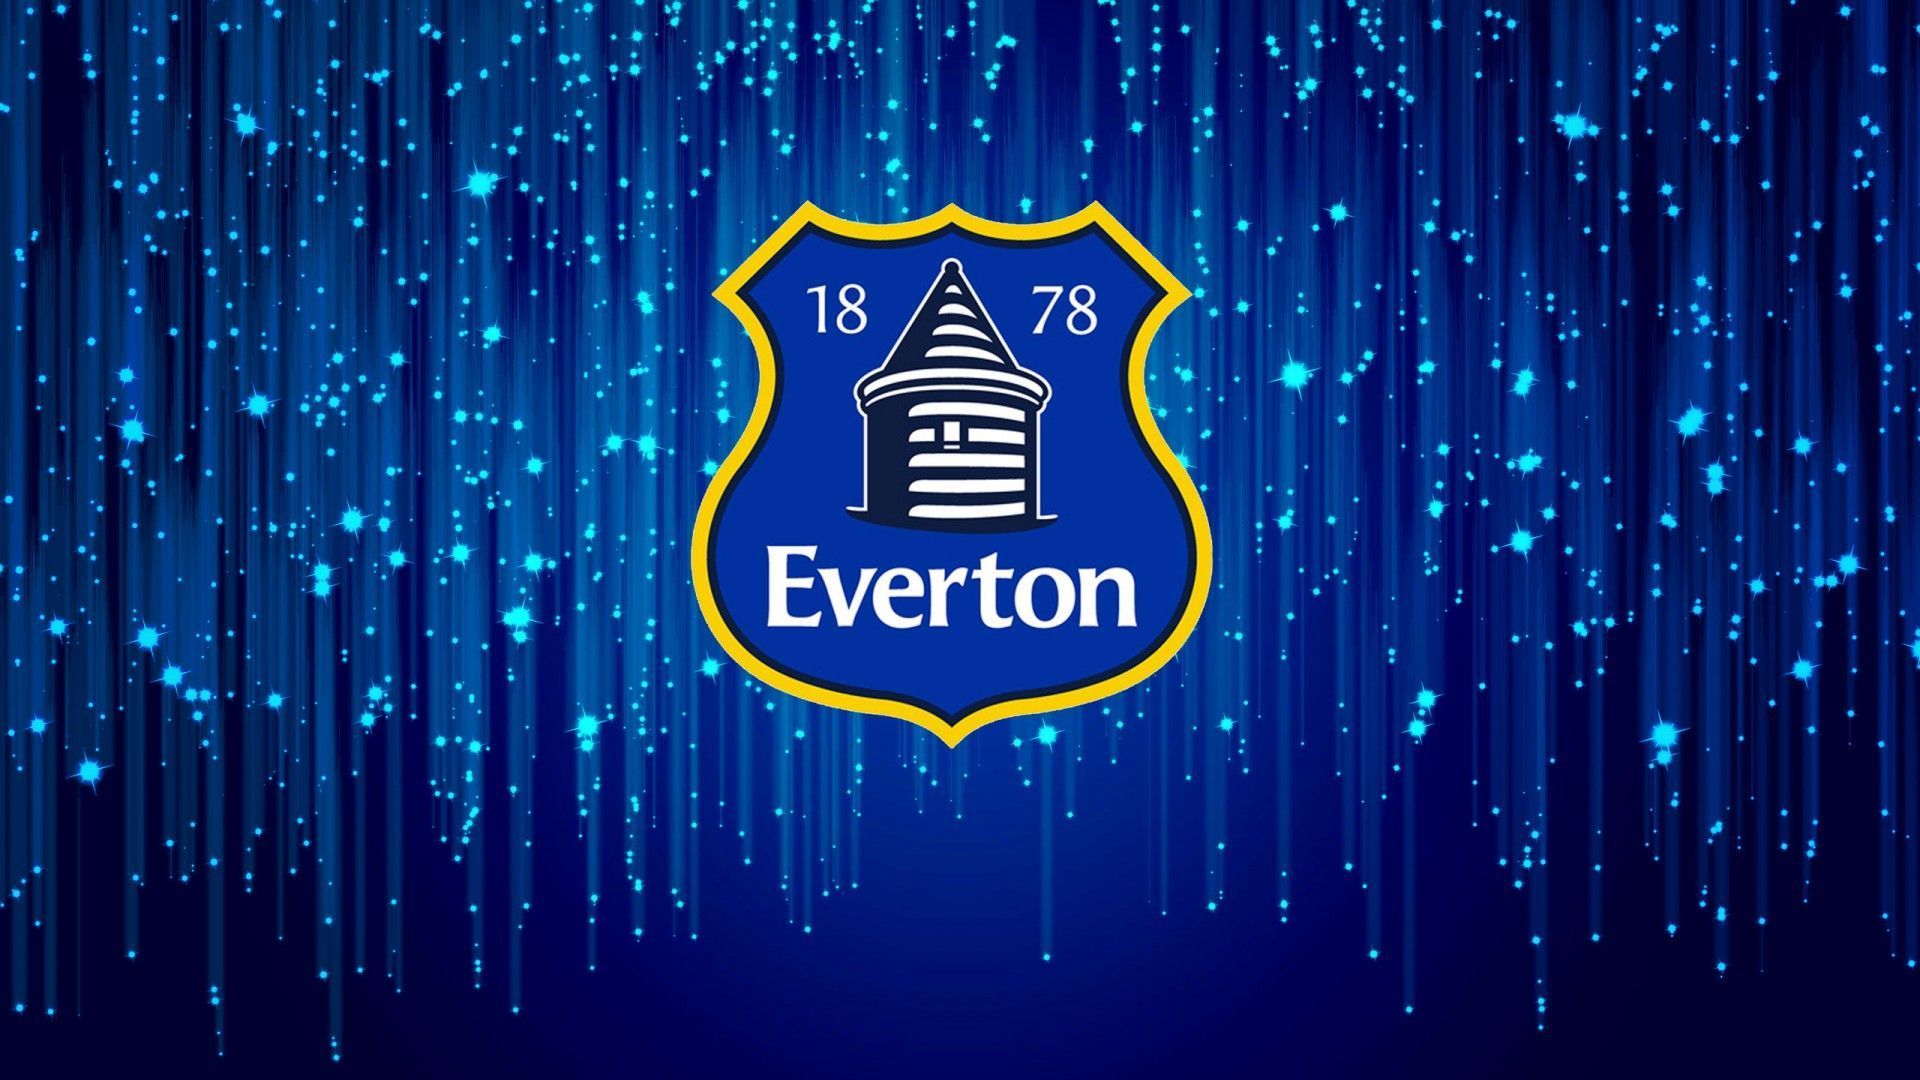 Everton FC HD Wallpapers And Photos download